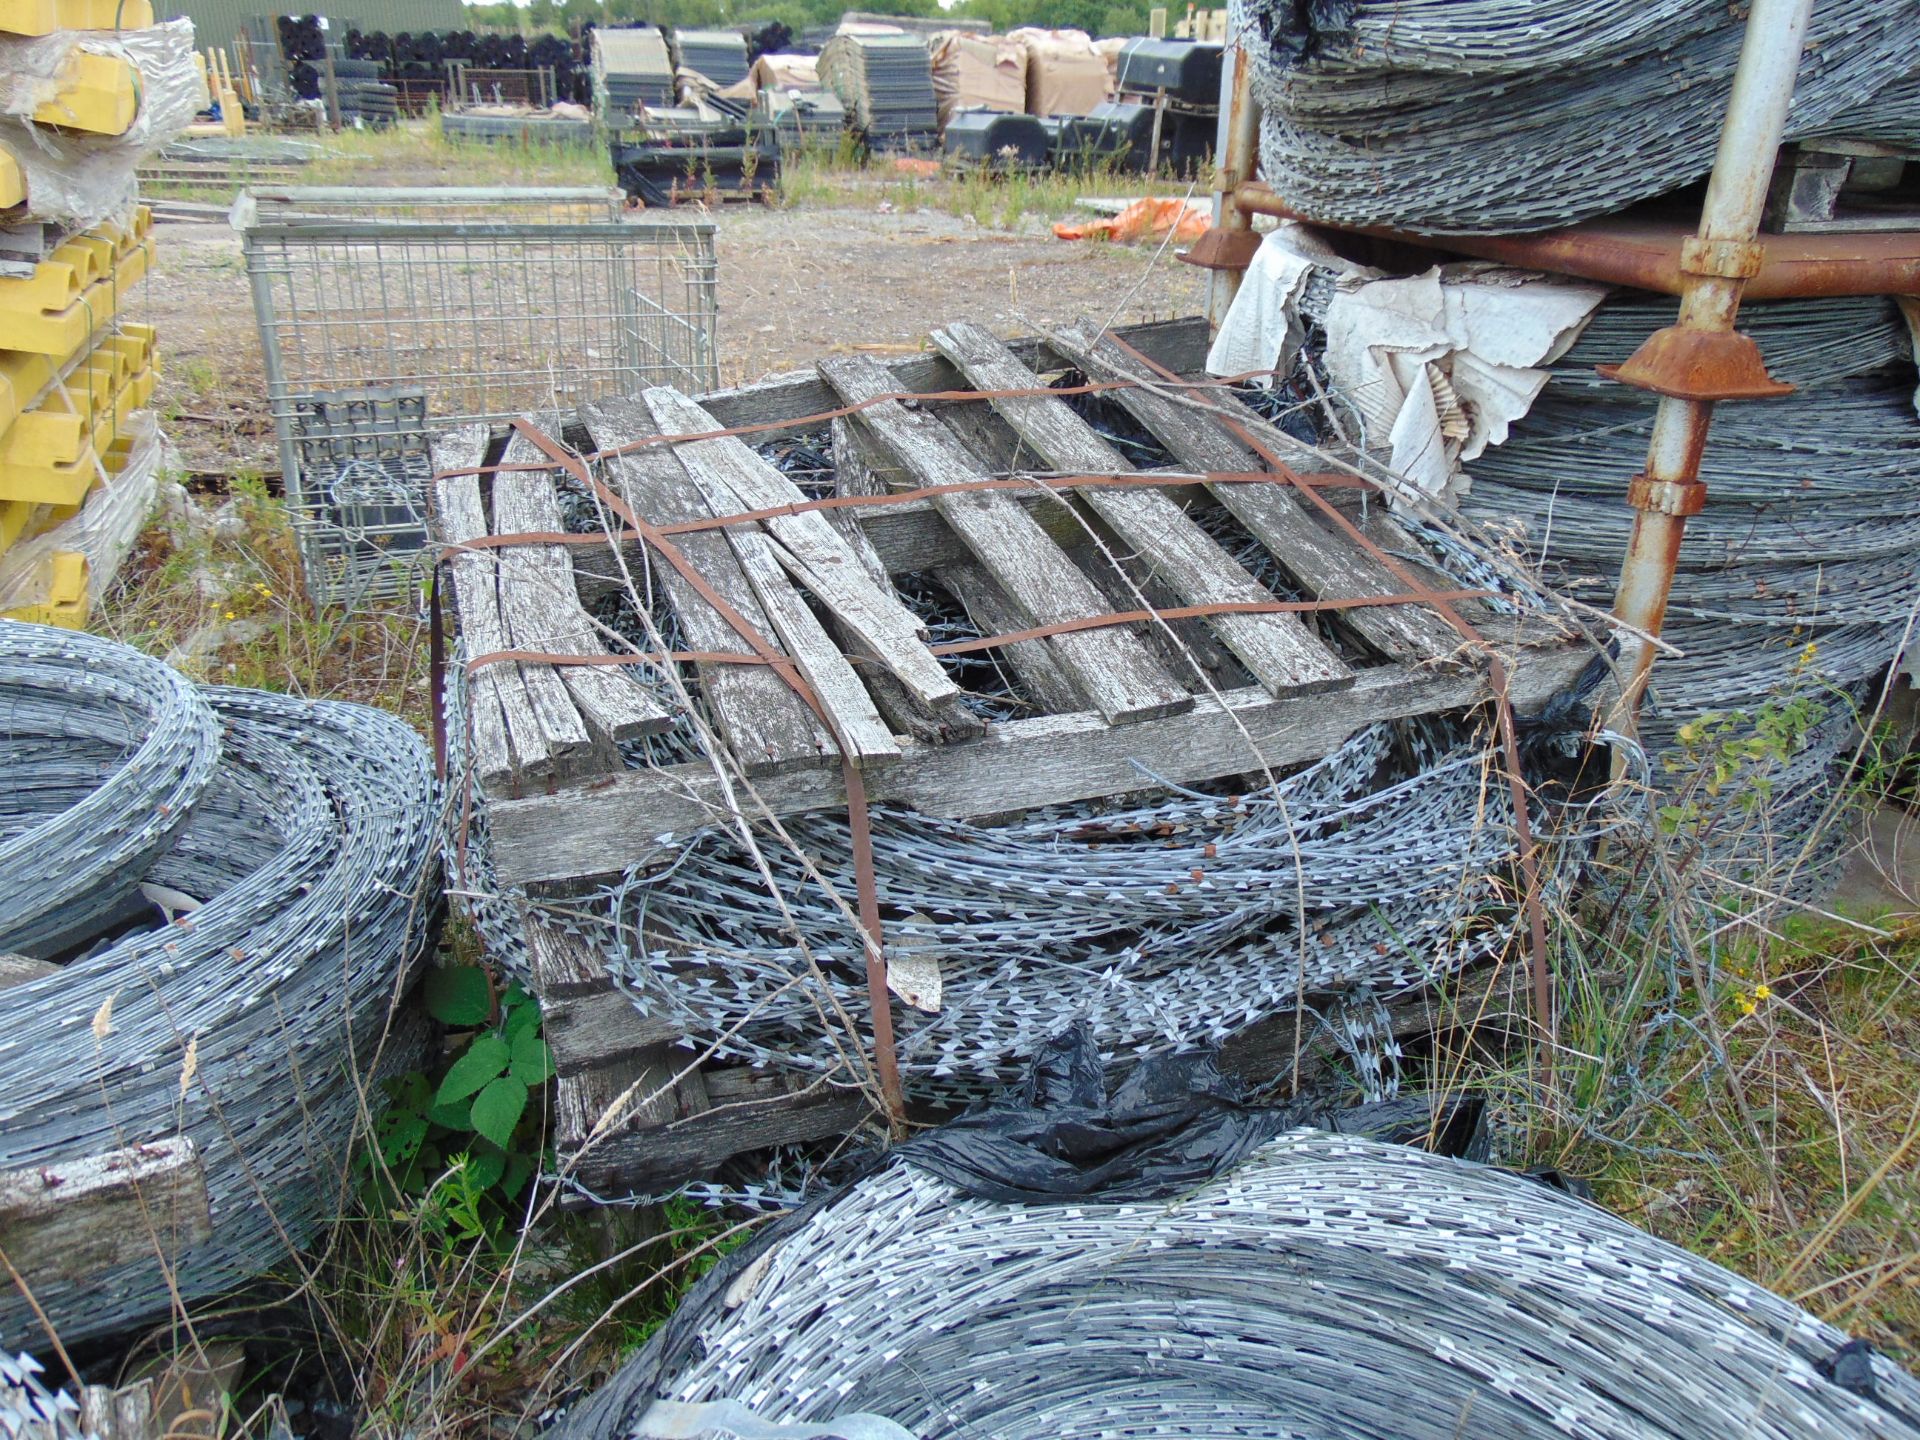 4 x Large Pallets of MoD Galvanised Razer Wire in Expanding Coils Quantity as shown - Image 5 of 6